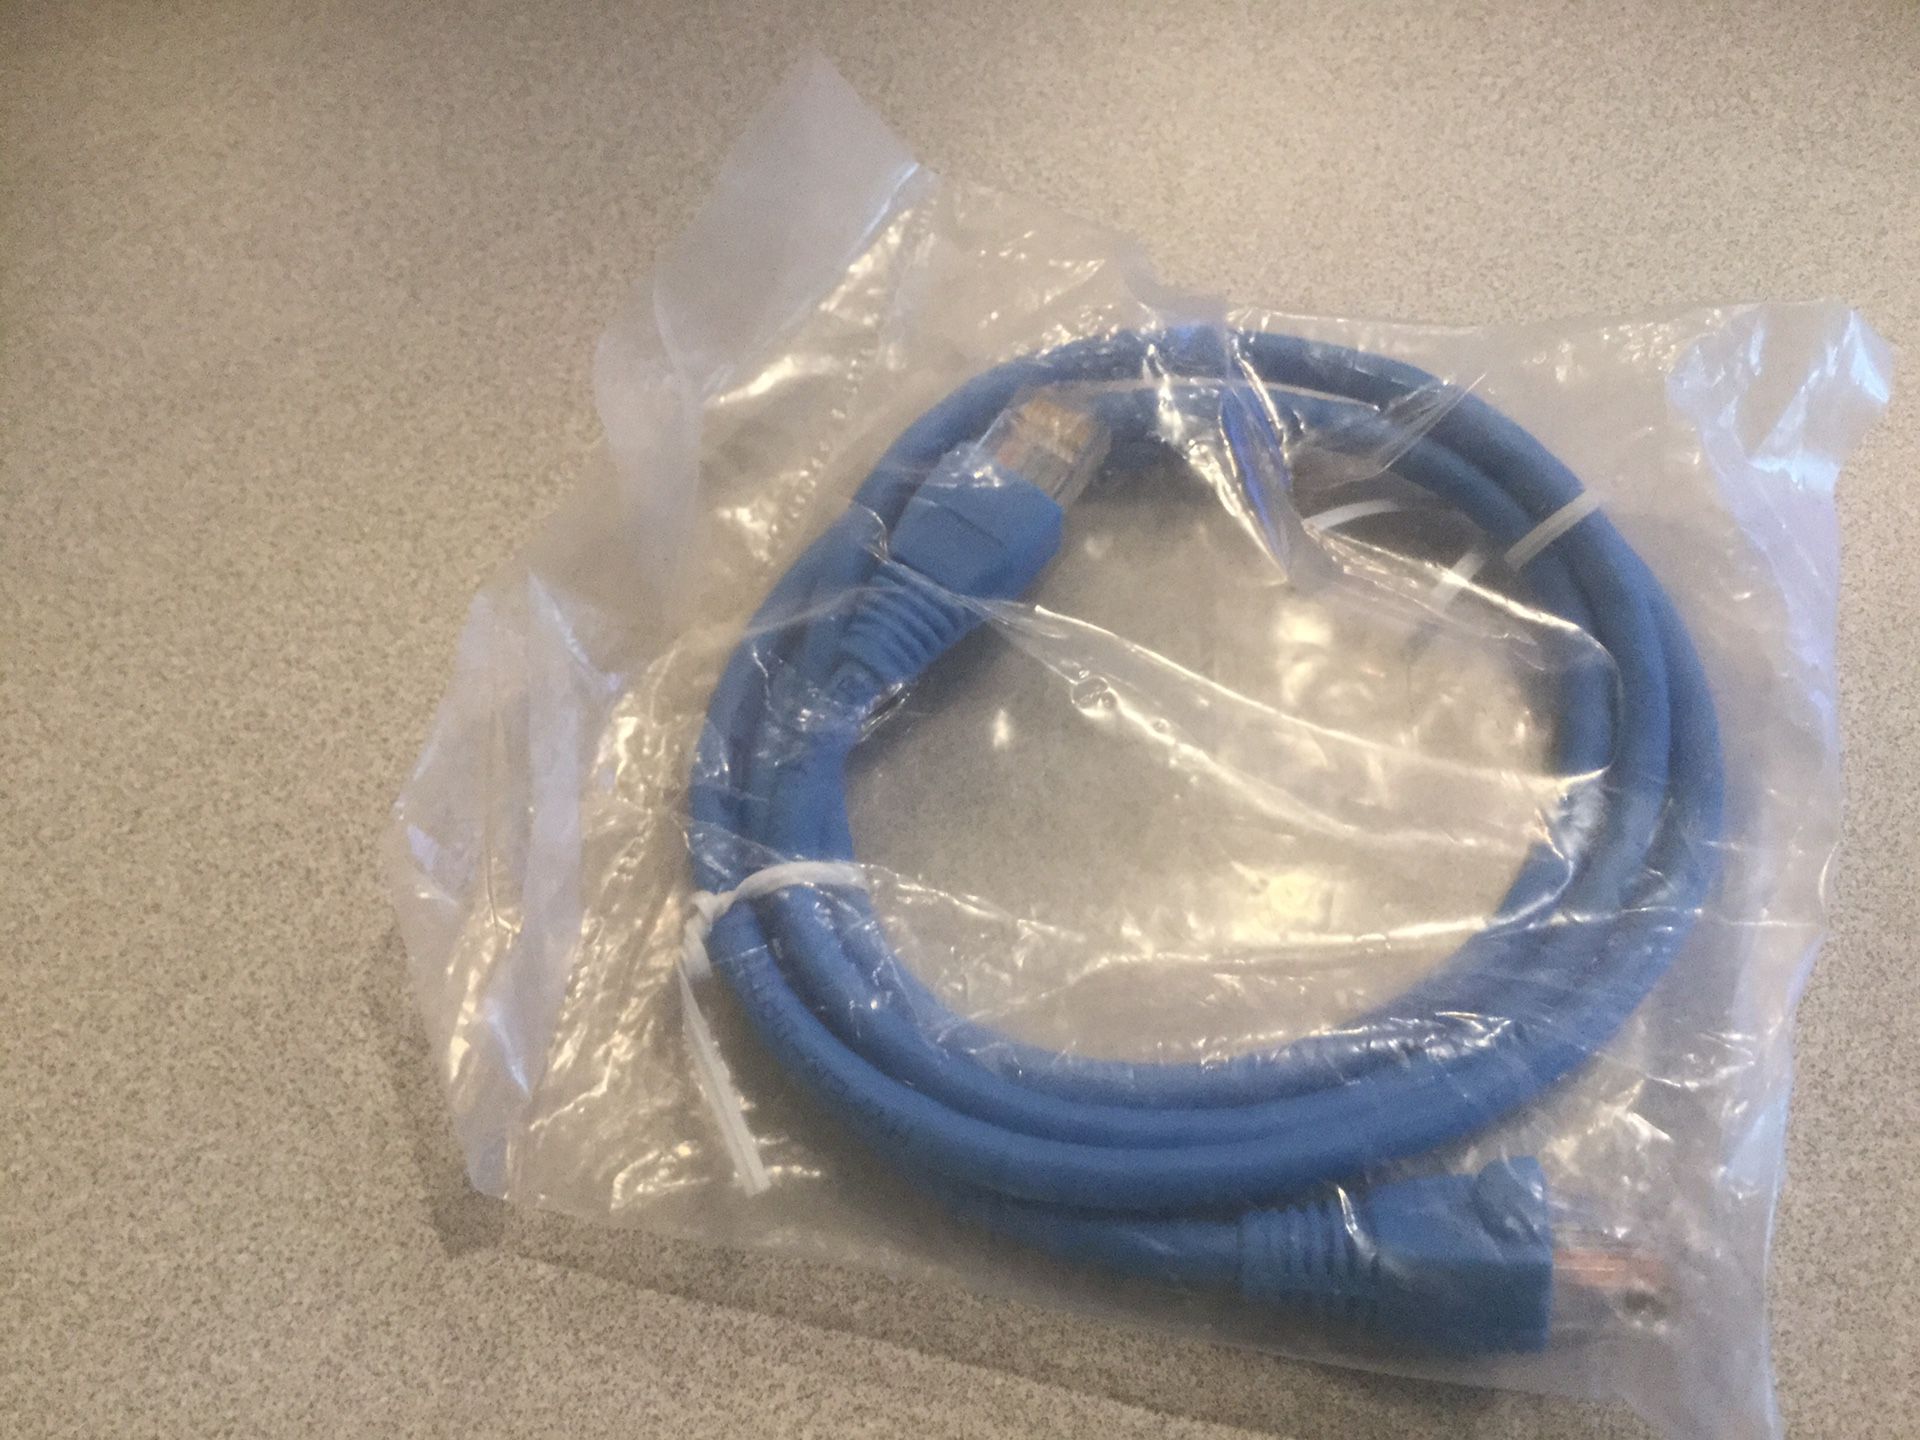 Ethernet cable new never opened